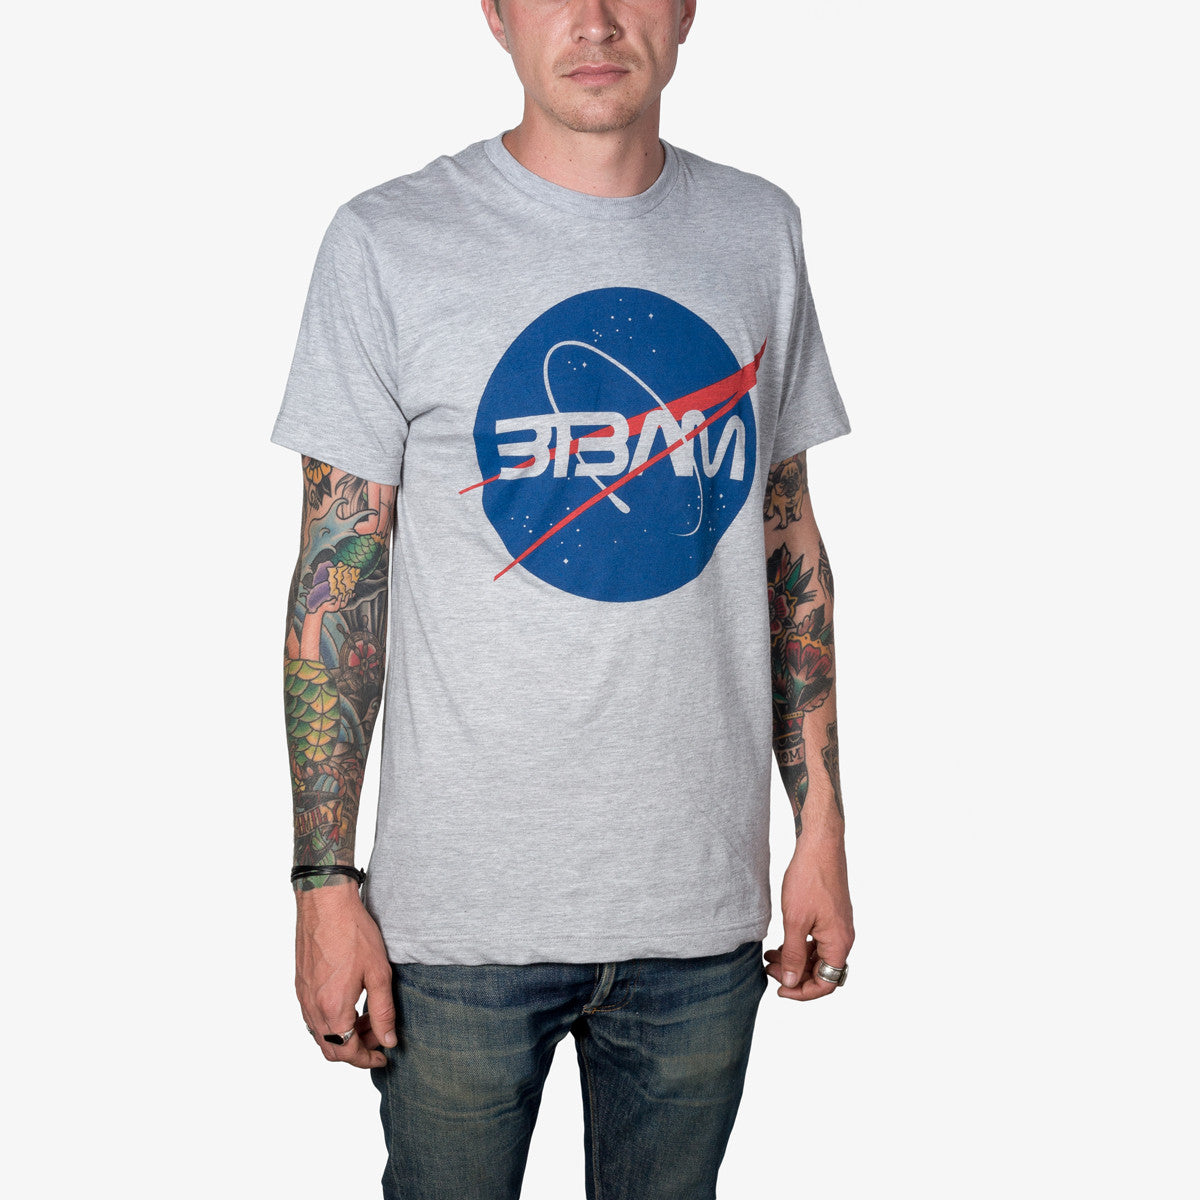 Between The Buried And Me Merch Connection - t shirt roblox nasa